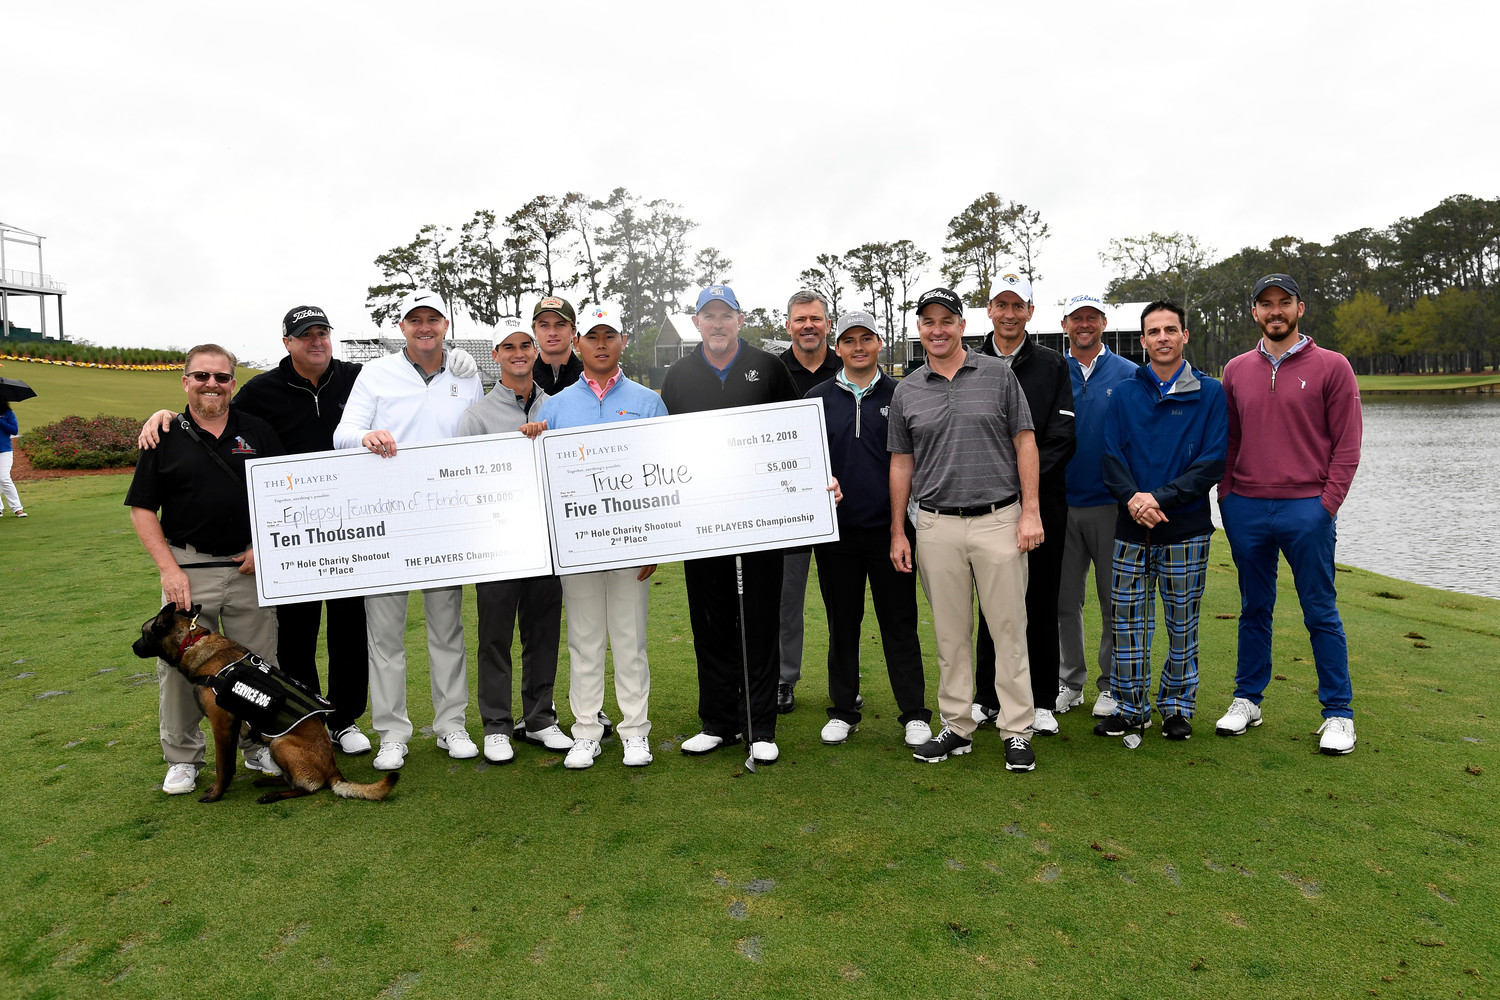 The Charity Challenge participants gather with Si Woo Kim after the event to display the donations to the Epilepsy Foundation of Florida and True Blue.